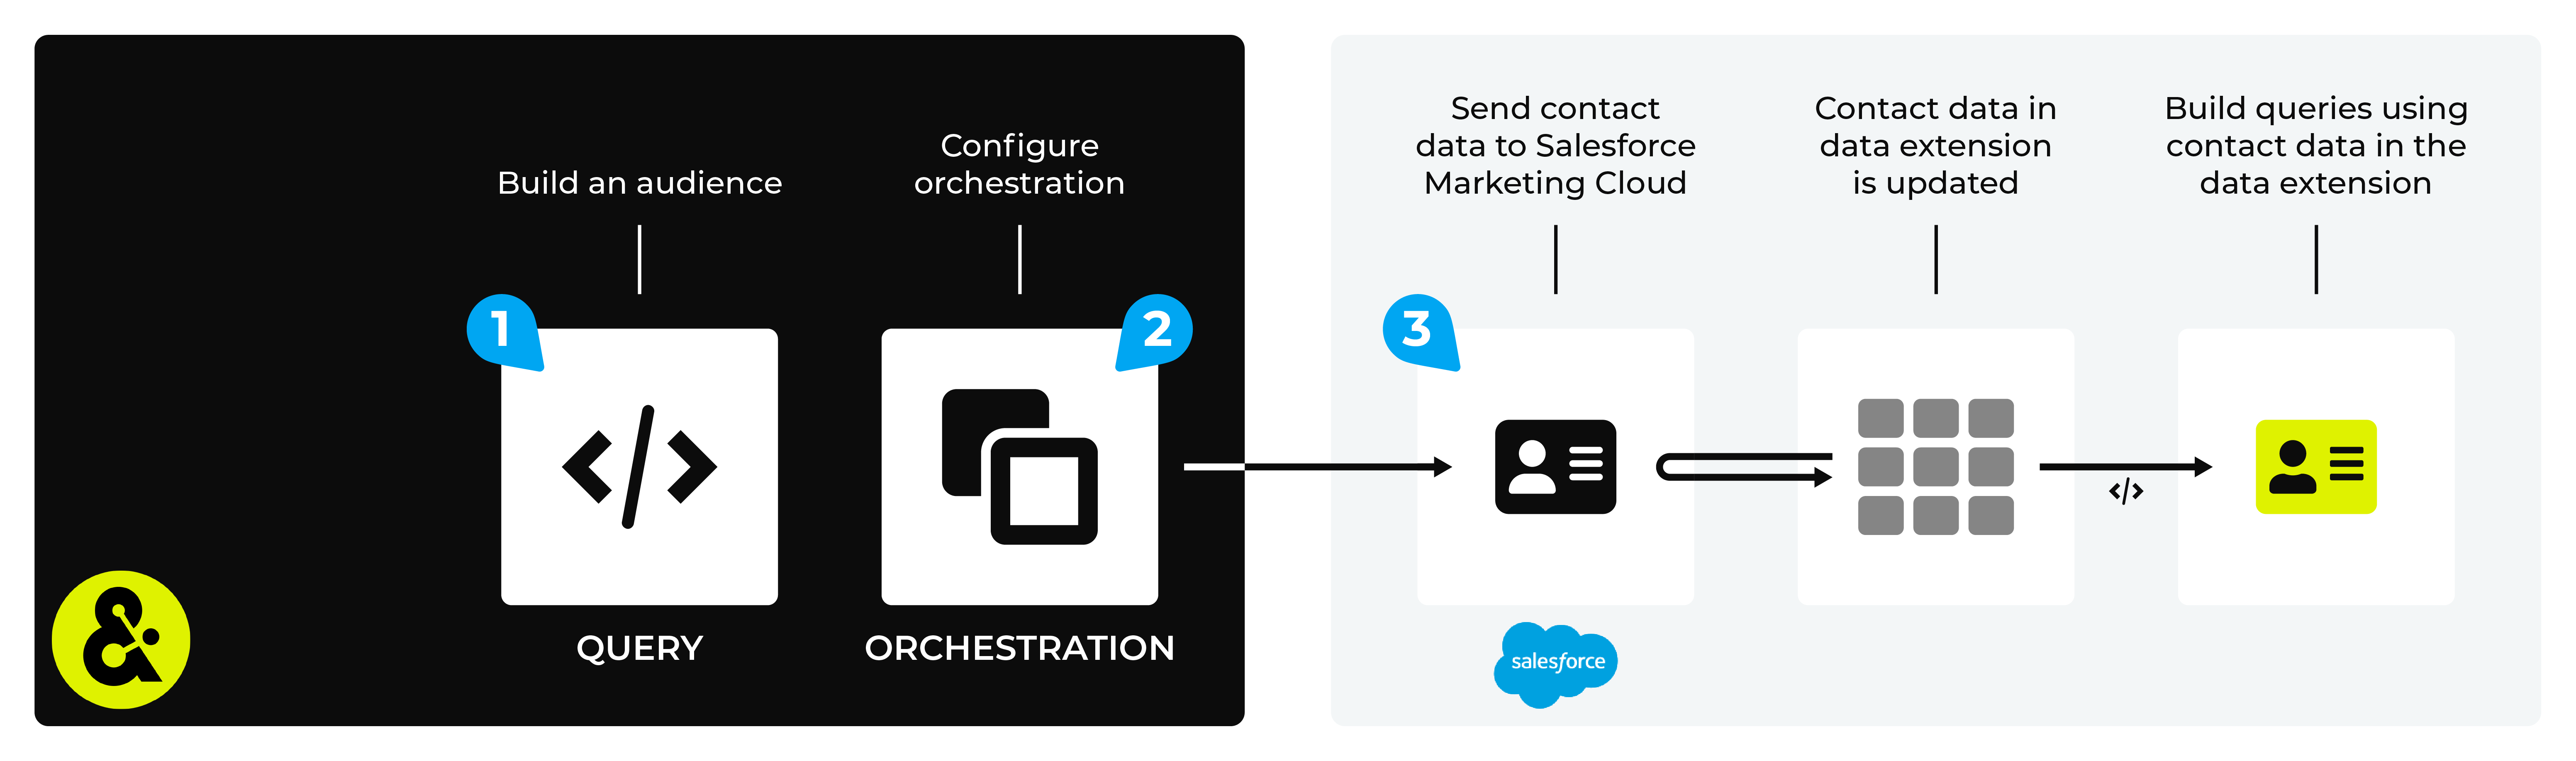 Send contact data from Amperity to Salesforce Marketing Cloud.